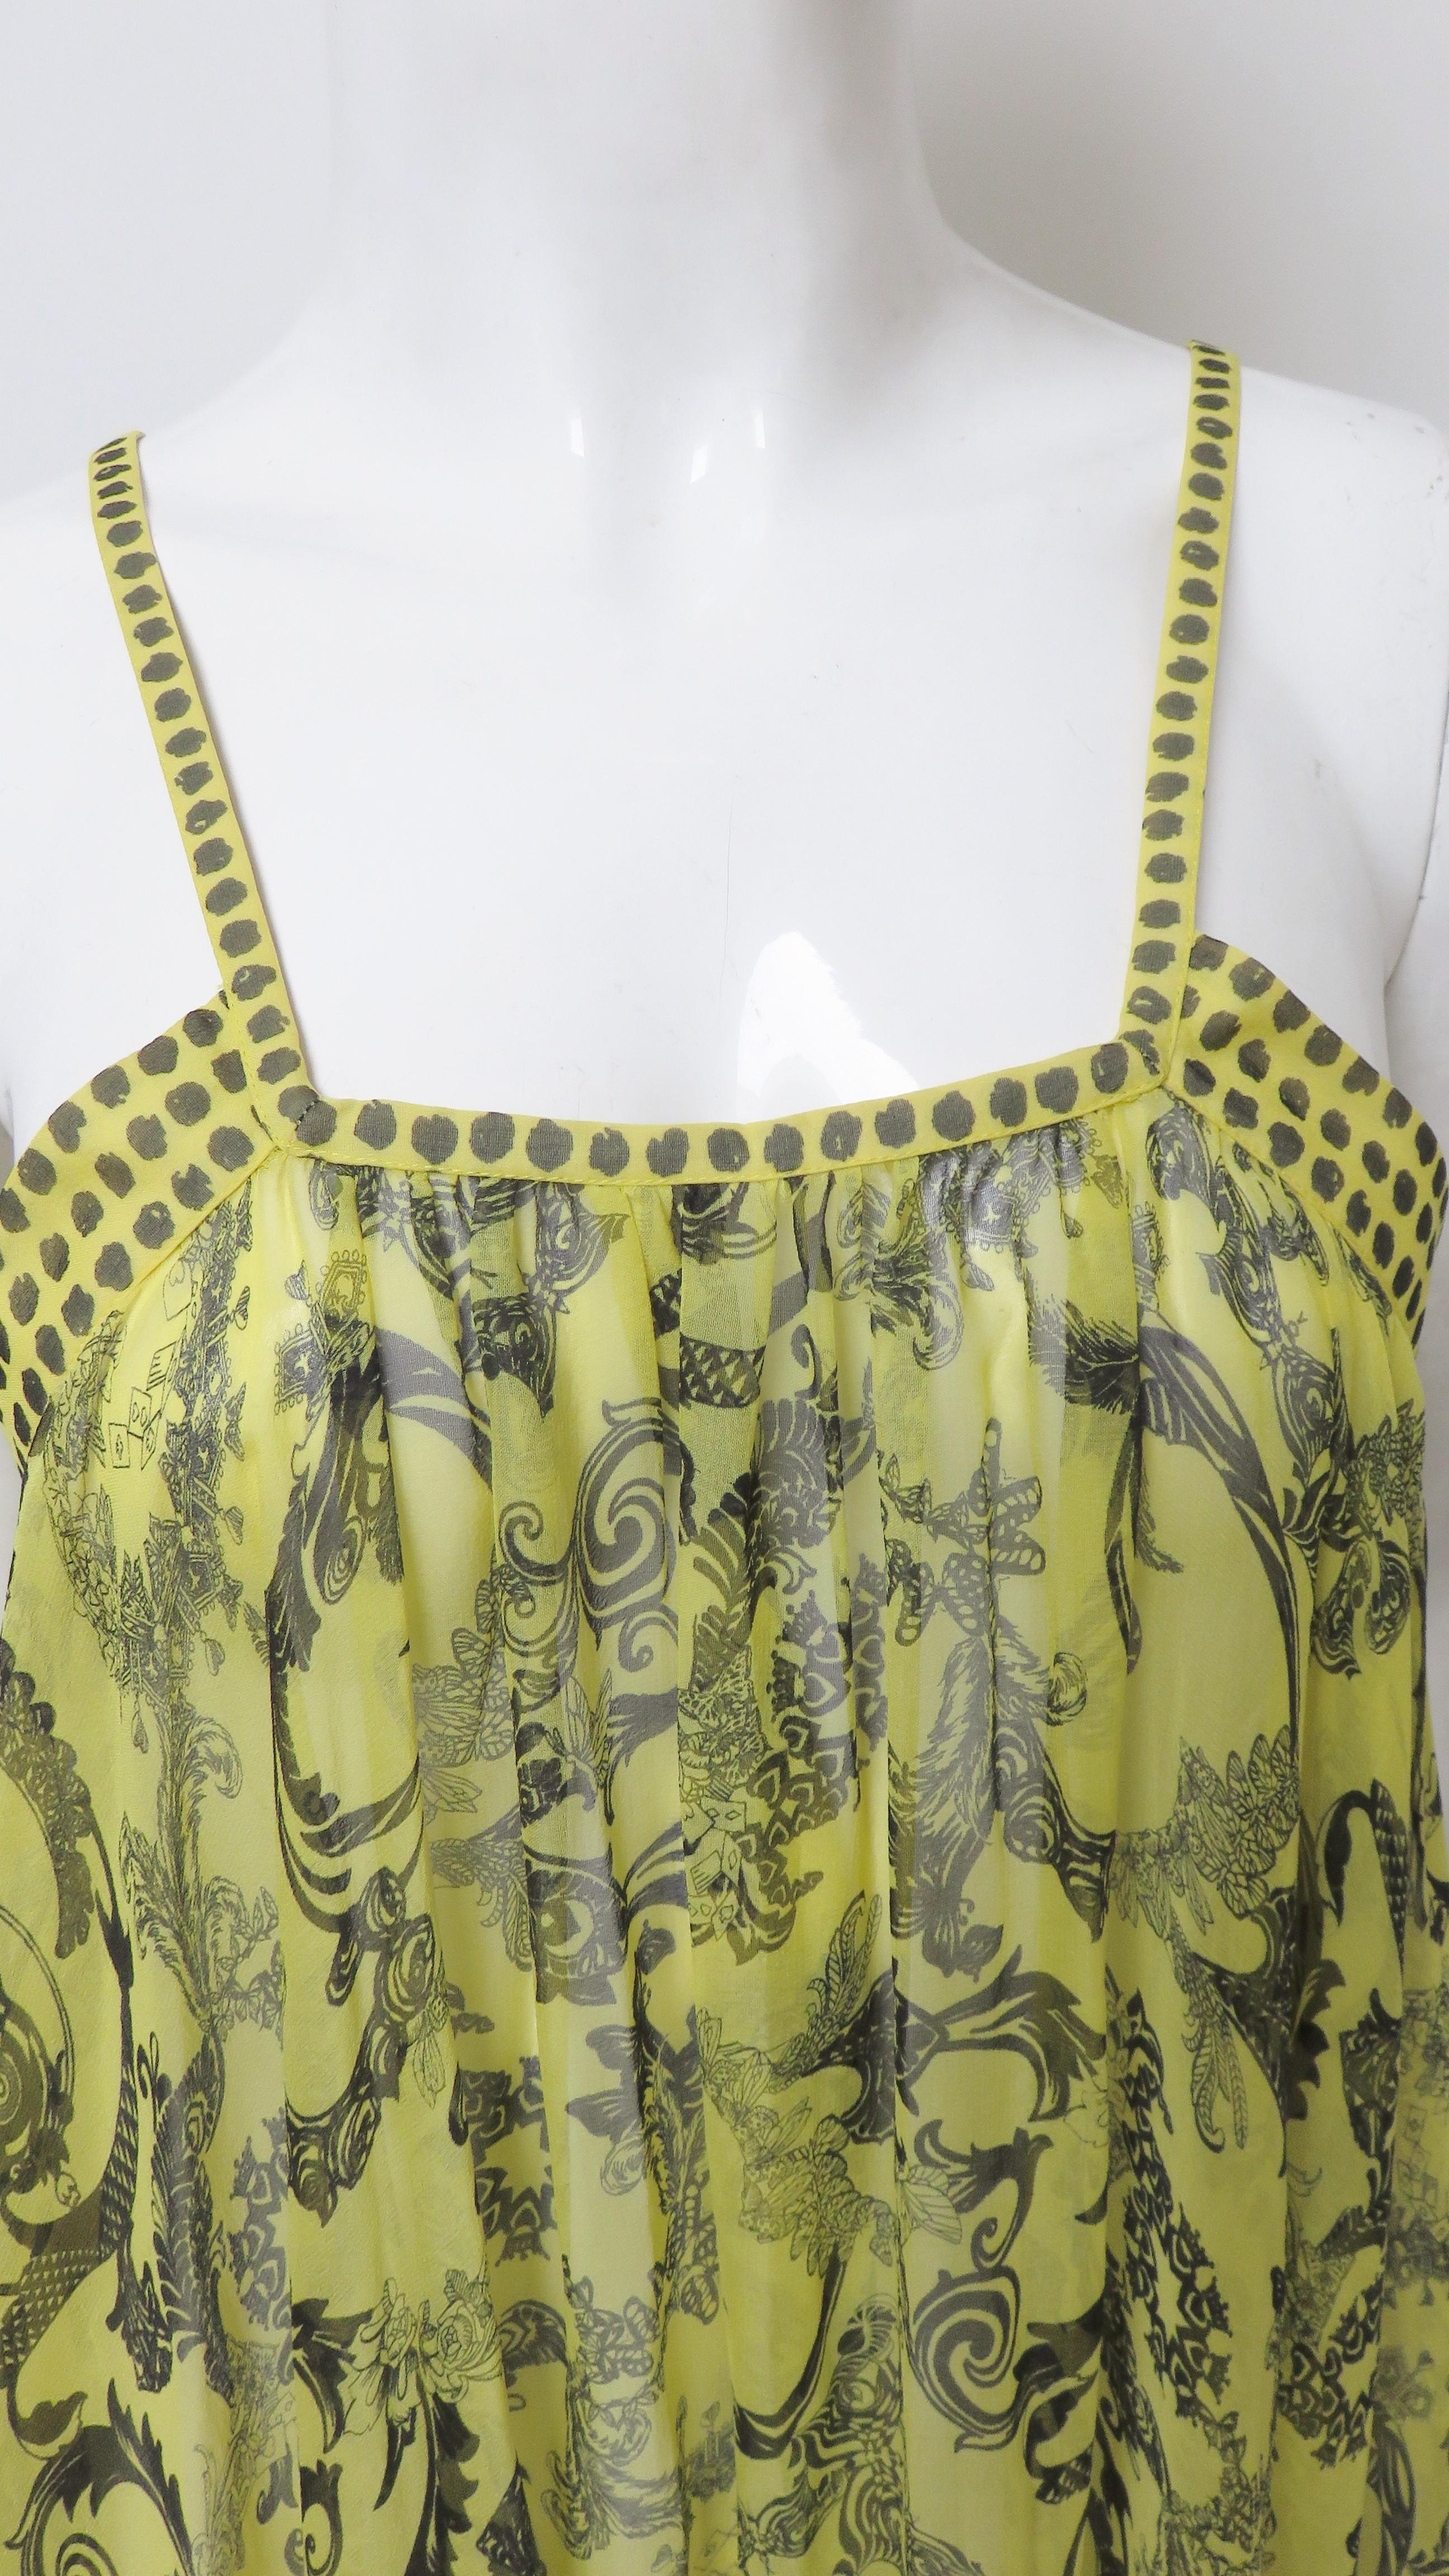 Versace Silk Dress with Elaborate Print In Excellent Condition For Sale In Water Mill, NY